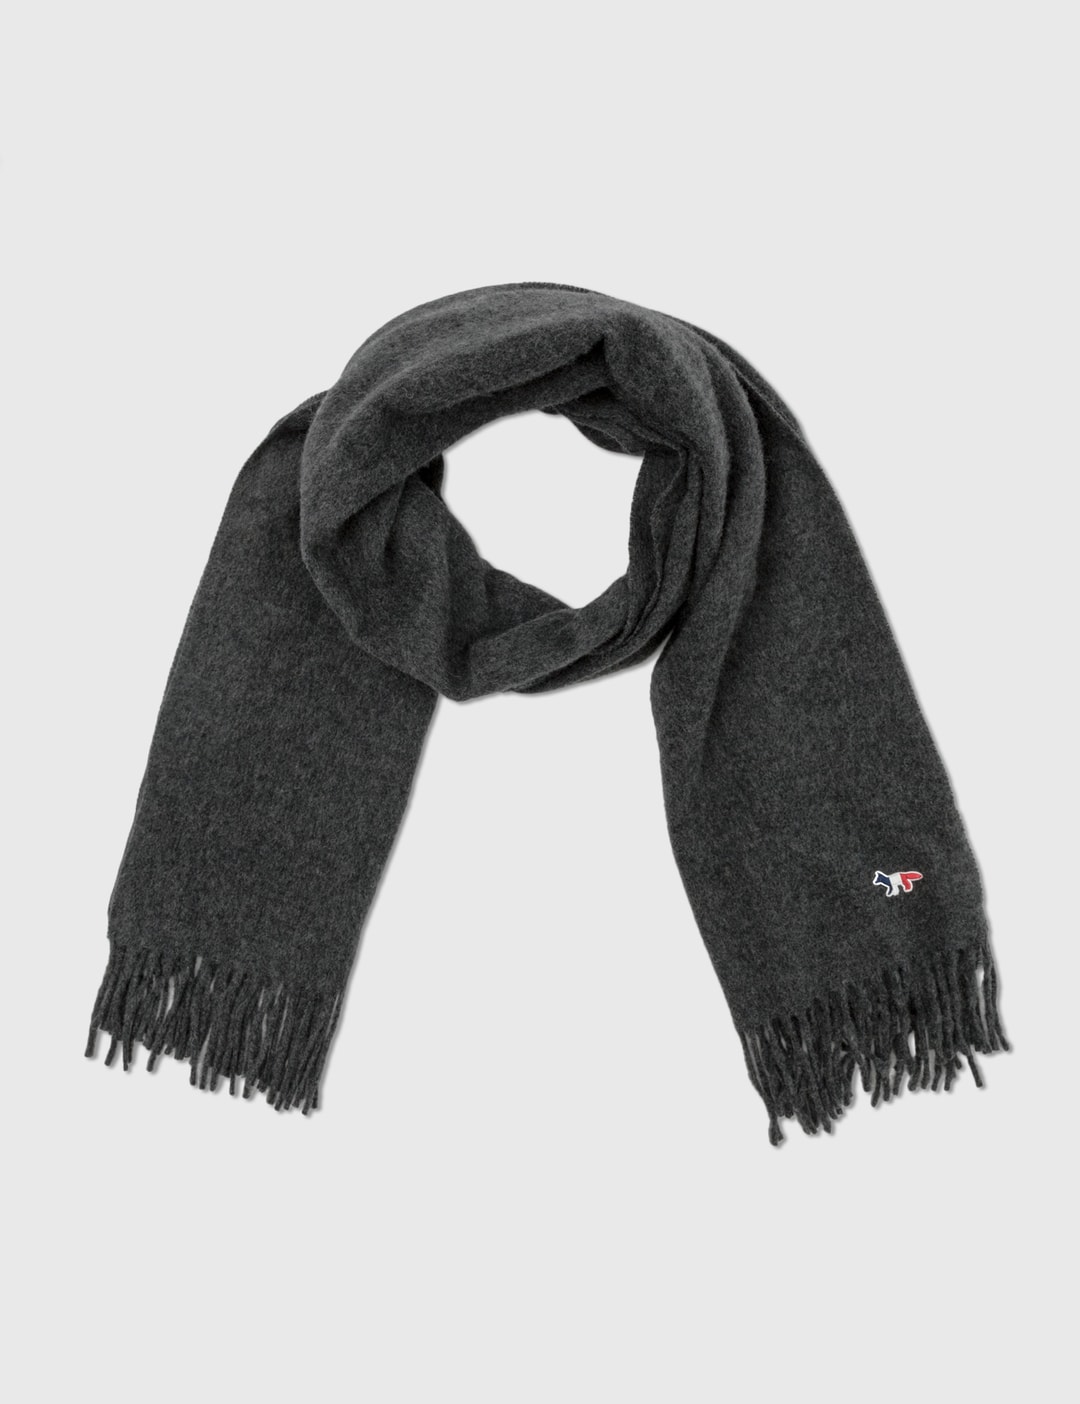 Maison Kitsuné - Tricolor Fox Wool Scarf | HBX - Globally Curated Fashion and Lifestyle by Hypebeast